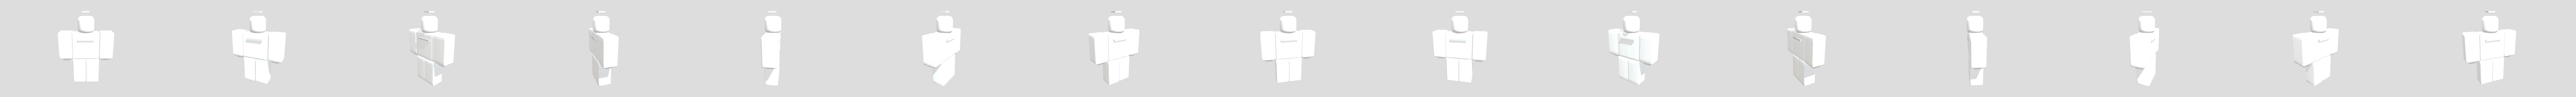 3D GFX ROBLOX - Download Free 3D model by GamingWithGamerTid  (@GamingWithGamerTid) [4ff3276]